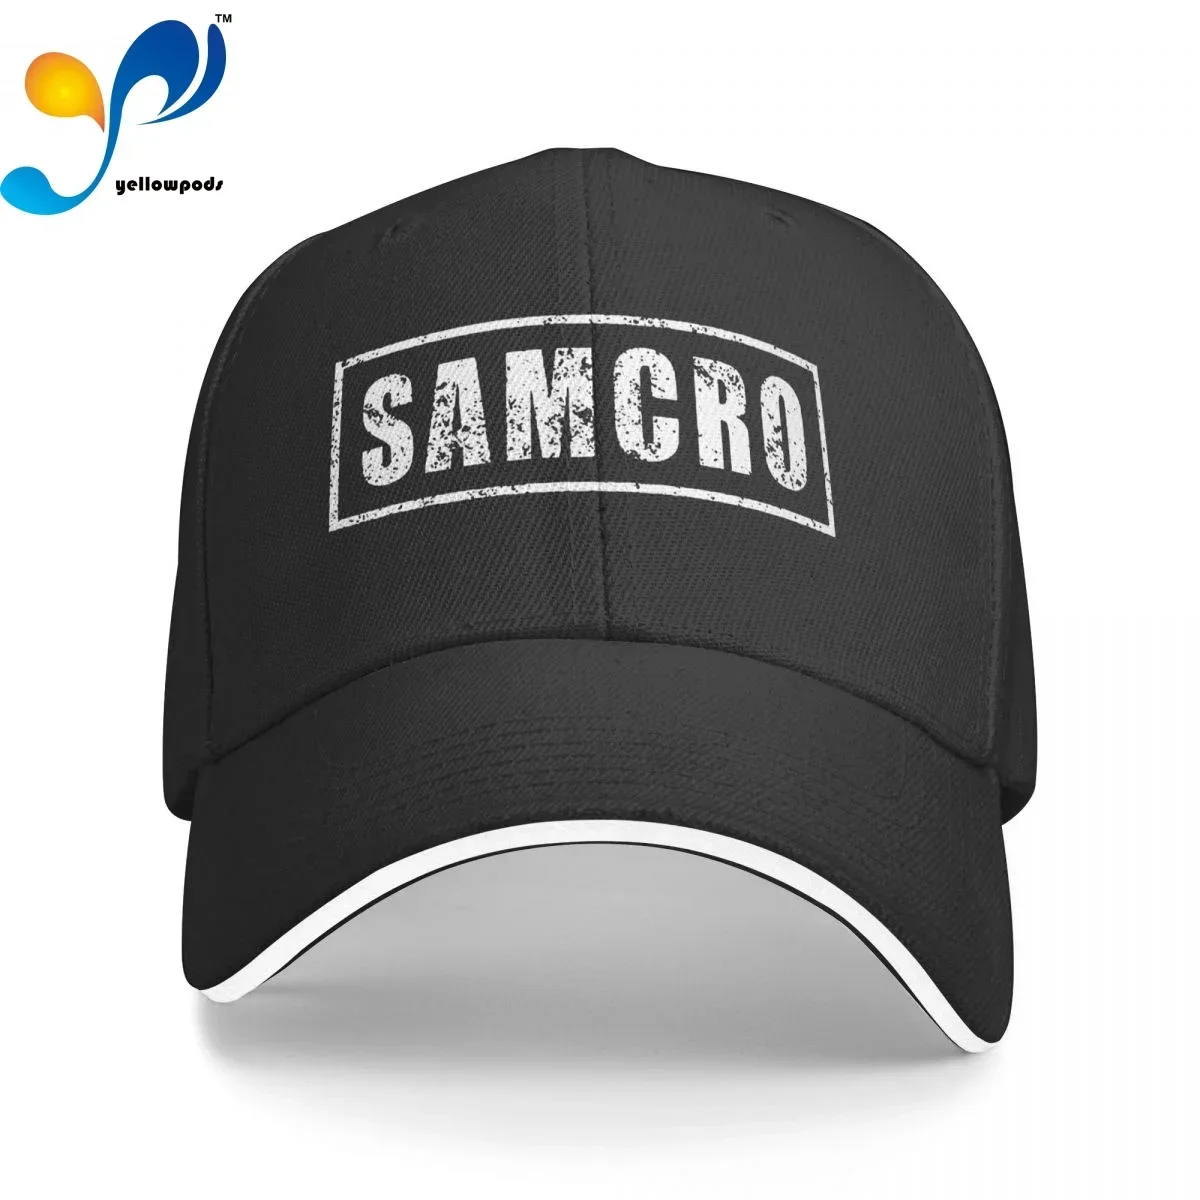 SAMCRO Baseball Hat Unisex Adjustable Baseball Caps Hats for Men and Women beware of wife dog is friendly unisex soft casquette cap fashion hat vintage adjustable baseball caps